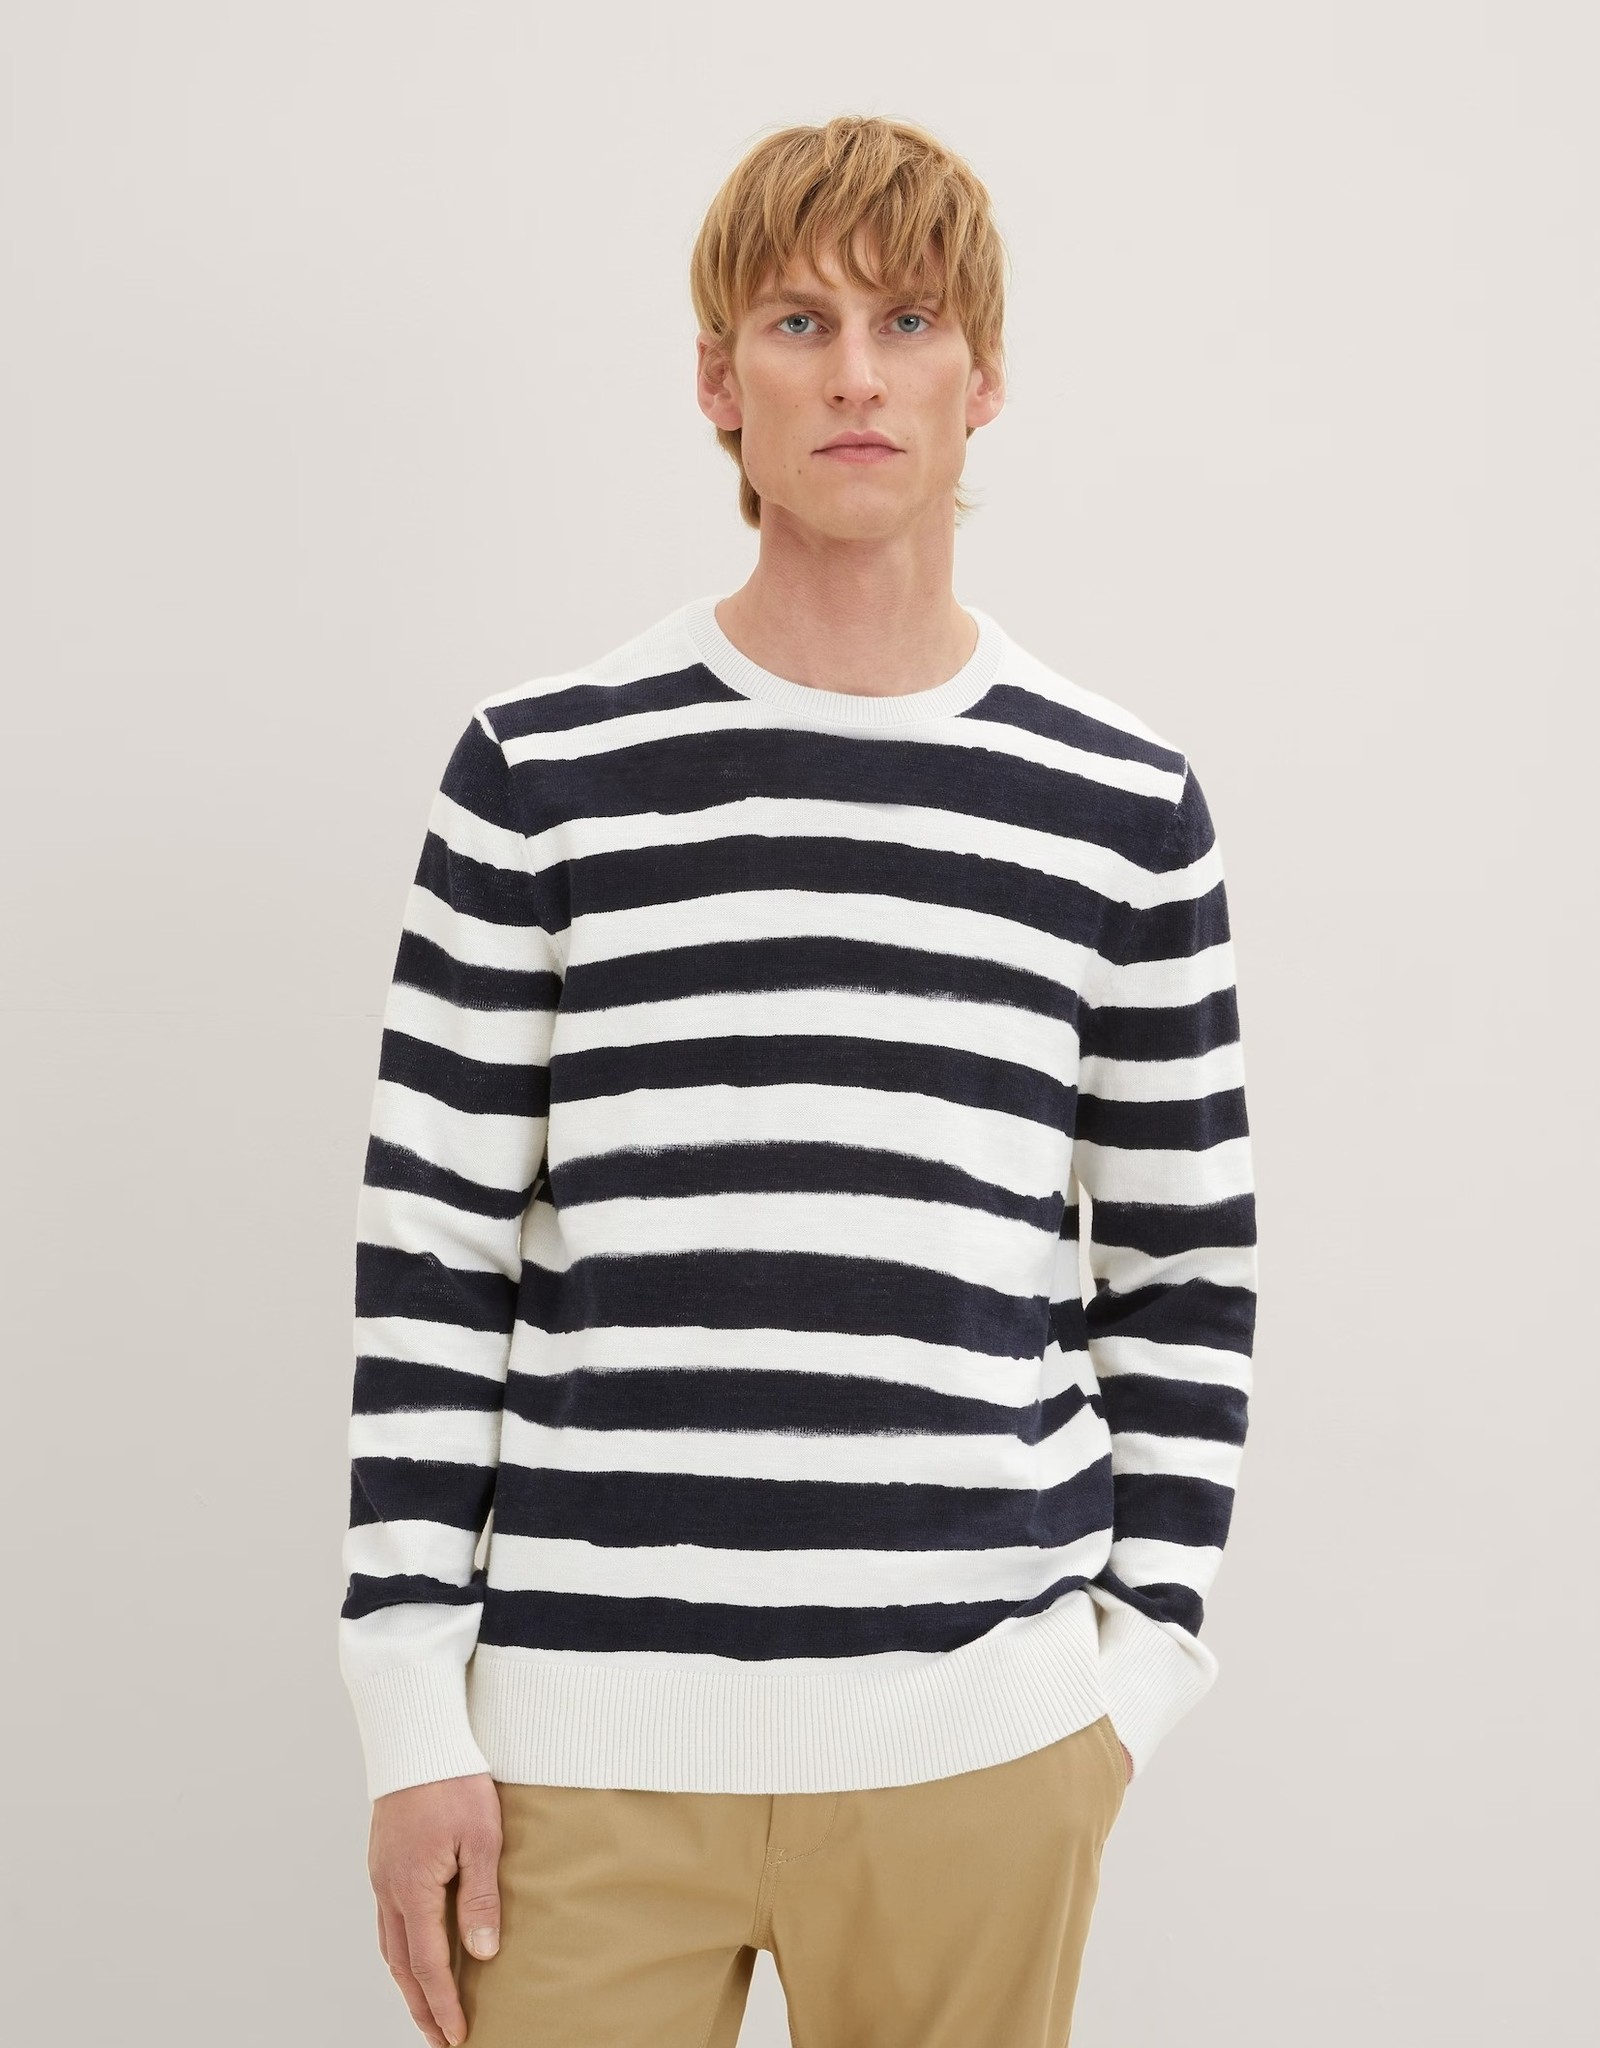 Tom Tailor Mens Striped Crew Nk Sweater